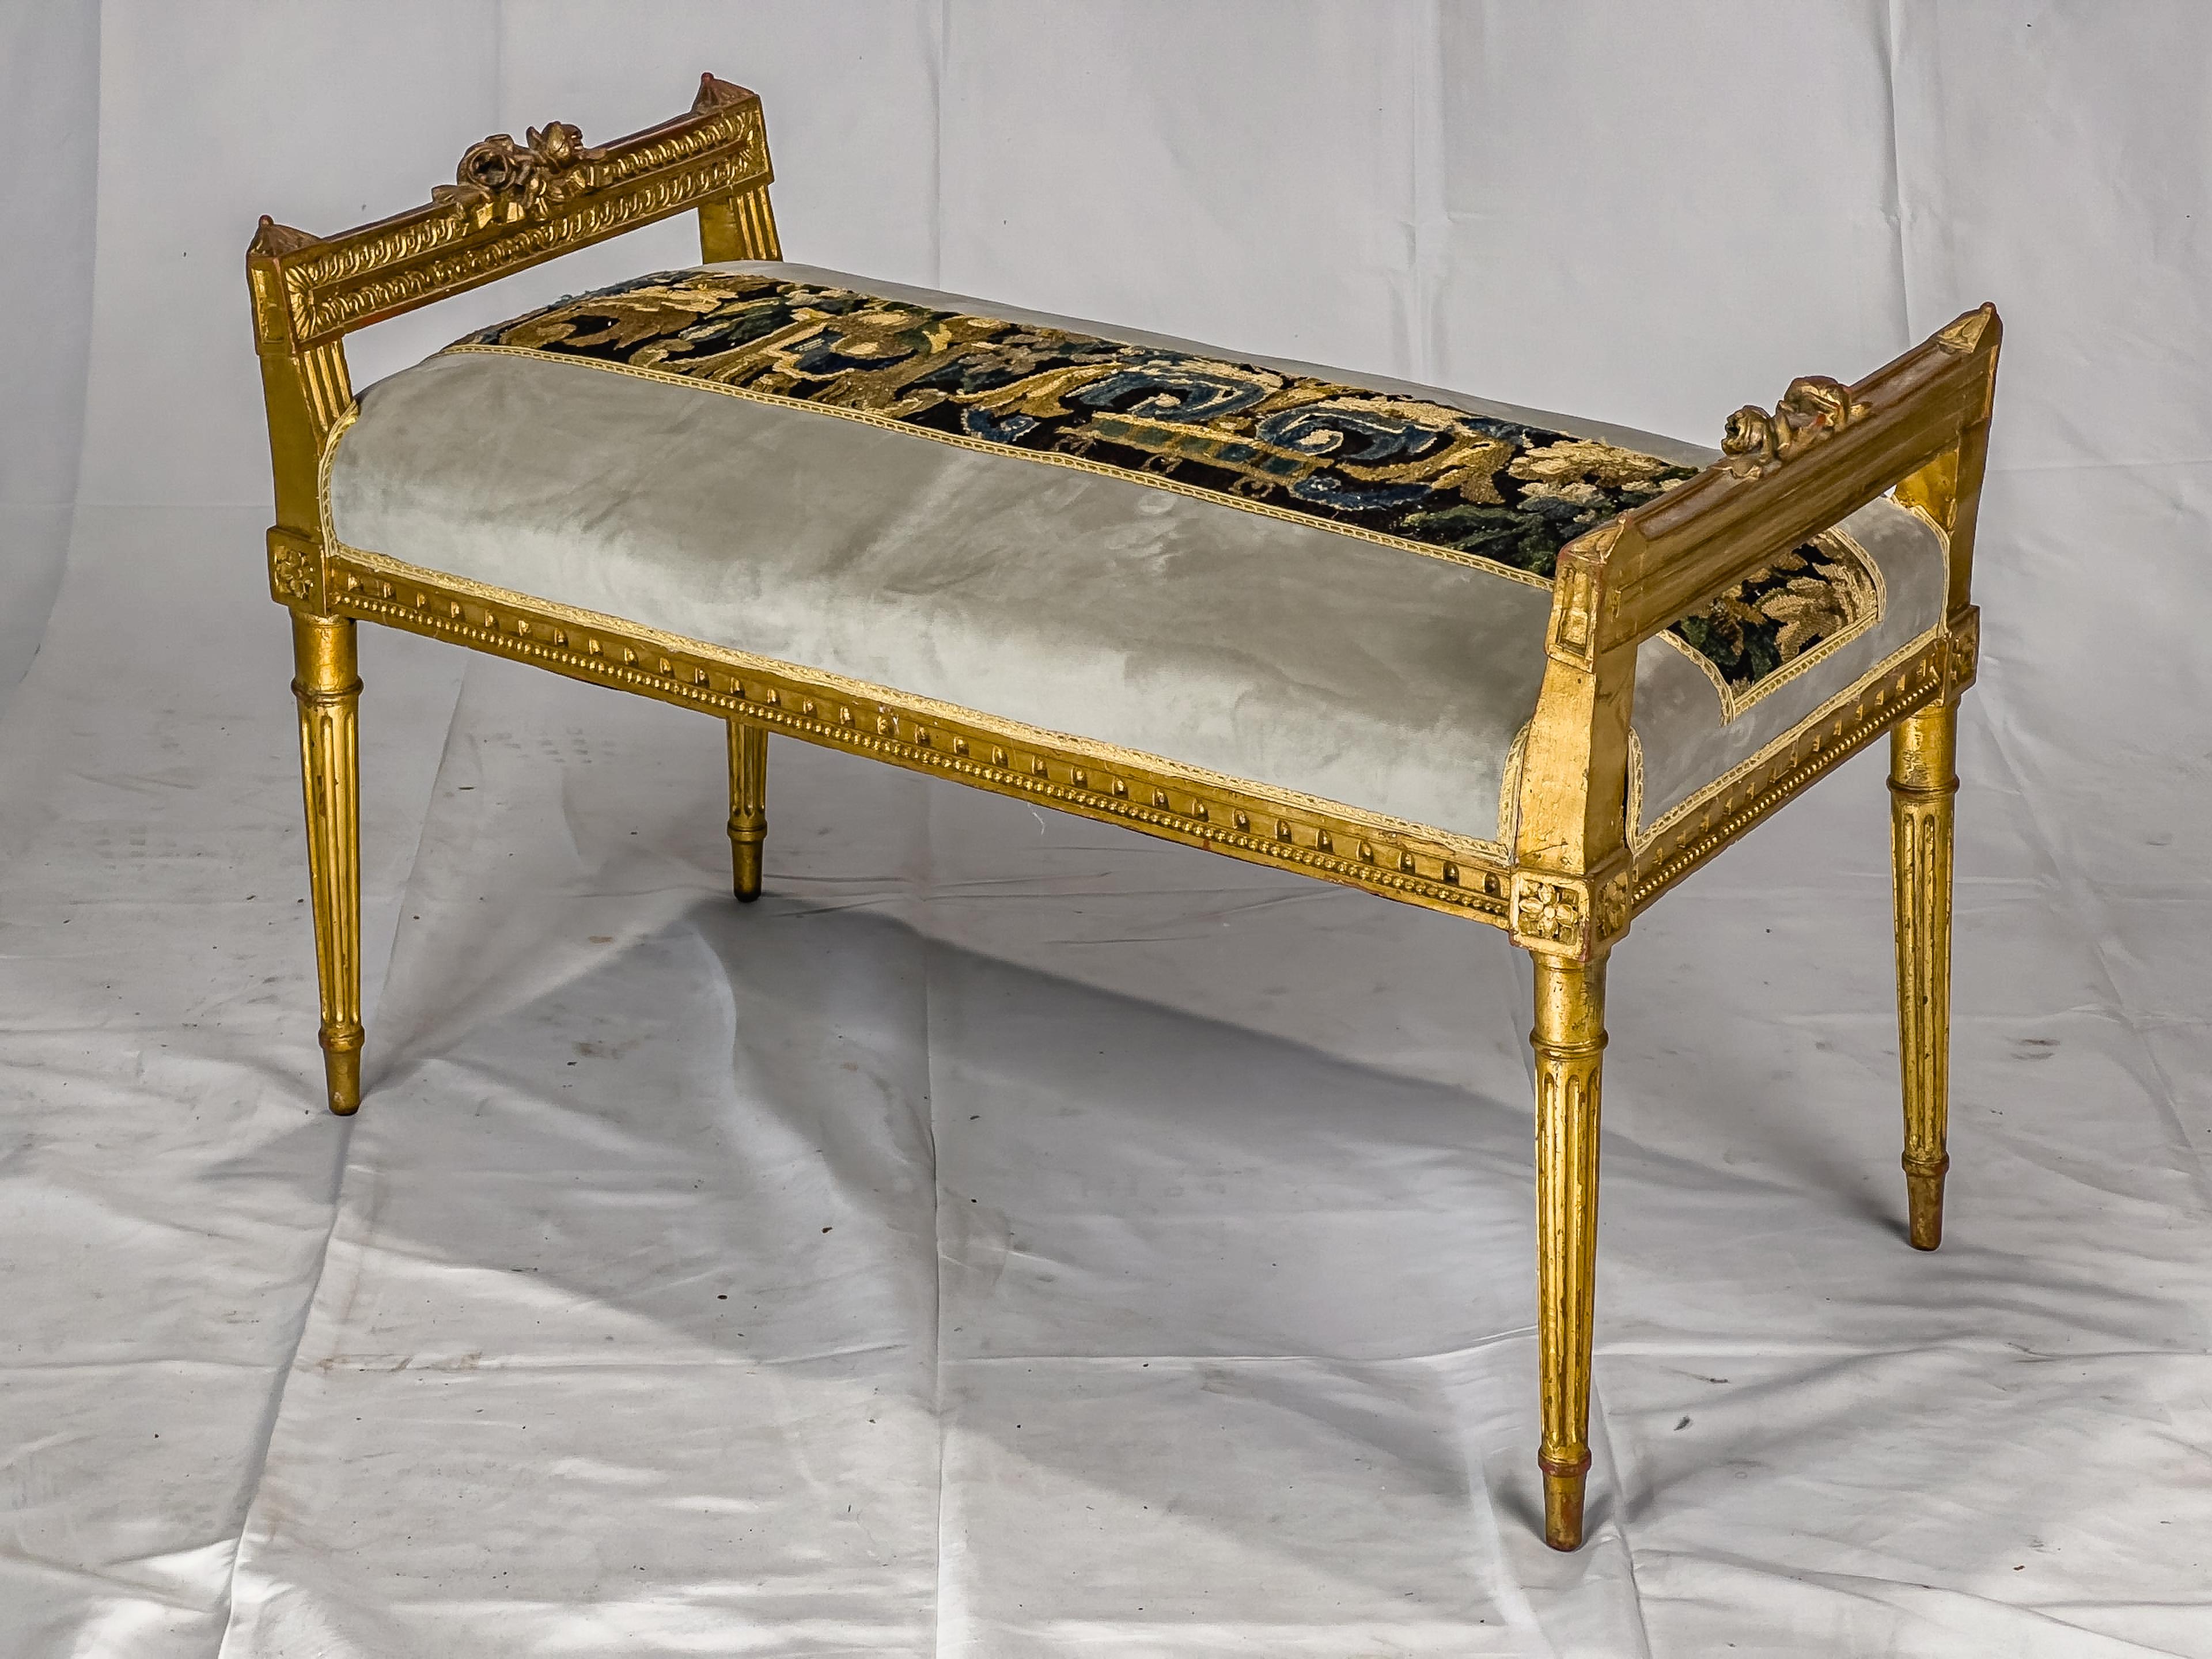 Louis XVI Style Gilt Bench Upholstered with an antique Aubusson Fragment centered on the tight seat covered in velvet.